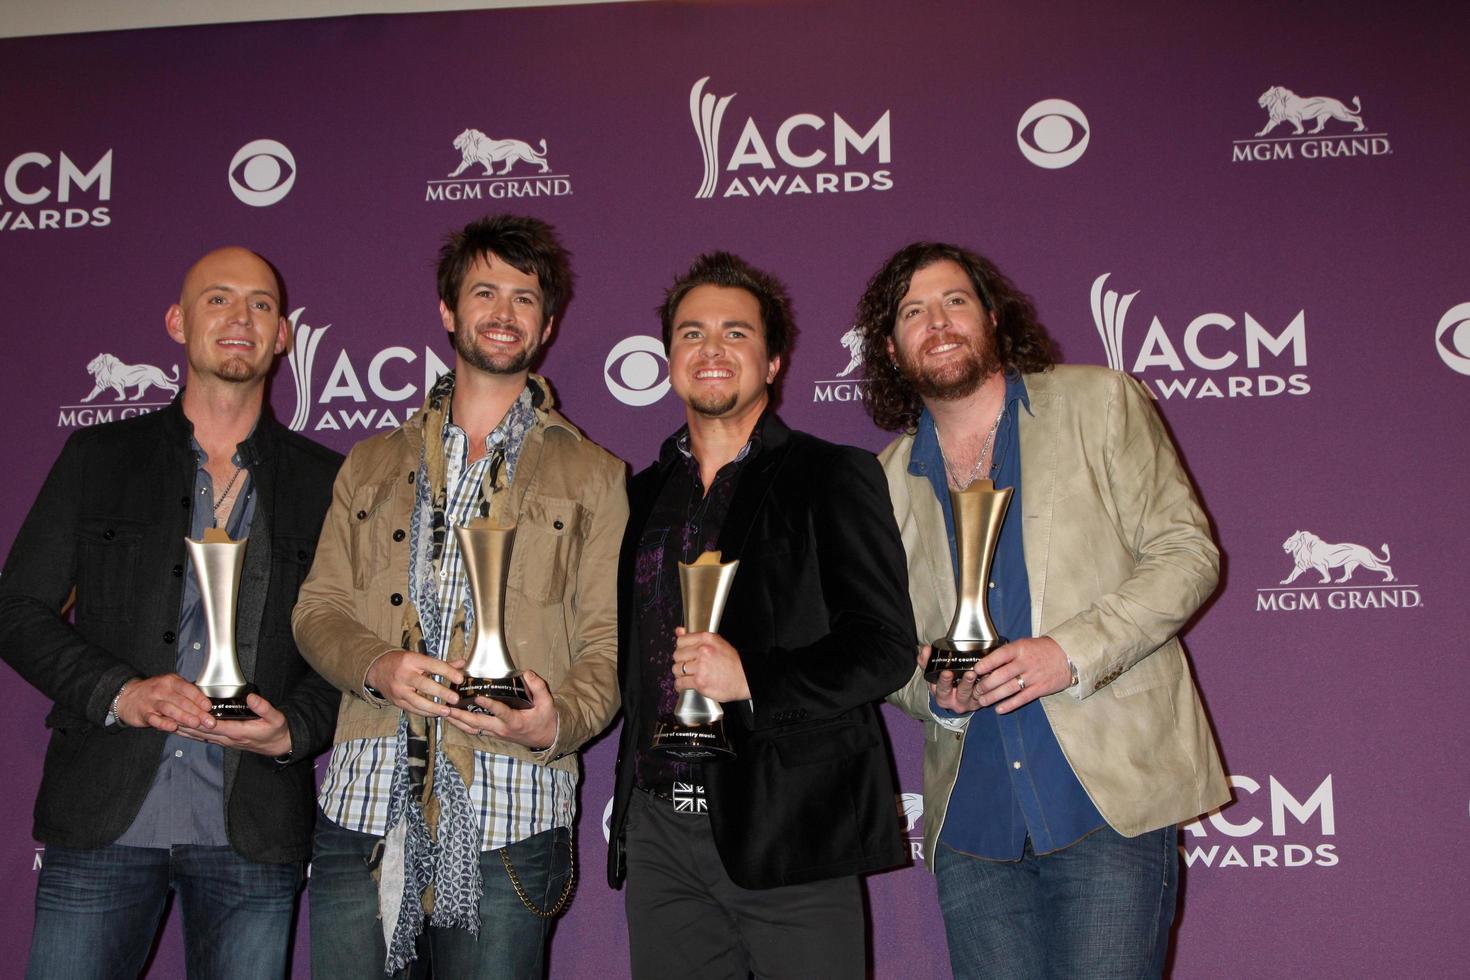 LAS VEGAS - APR 1 - Eli Young Band in the press room at the 2012 Academy of Country Music Awards at MGM Grand Garden Arena on April 1, 2010 in Las Vegas, NV photo